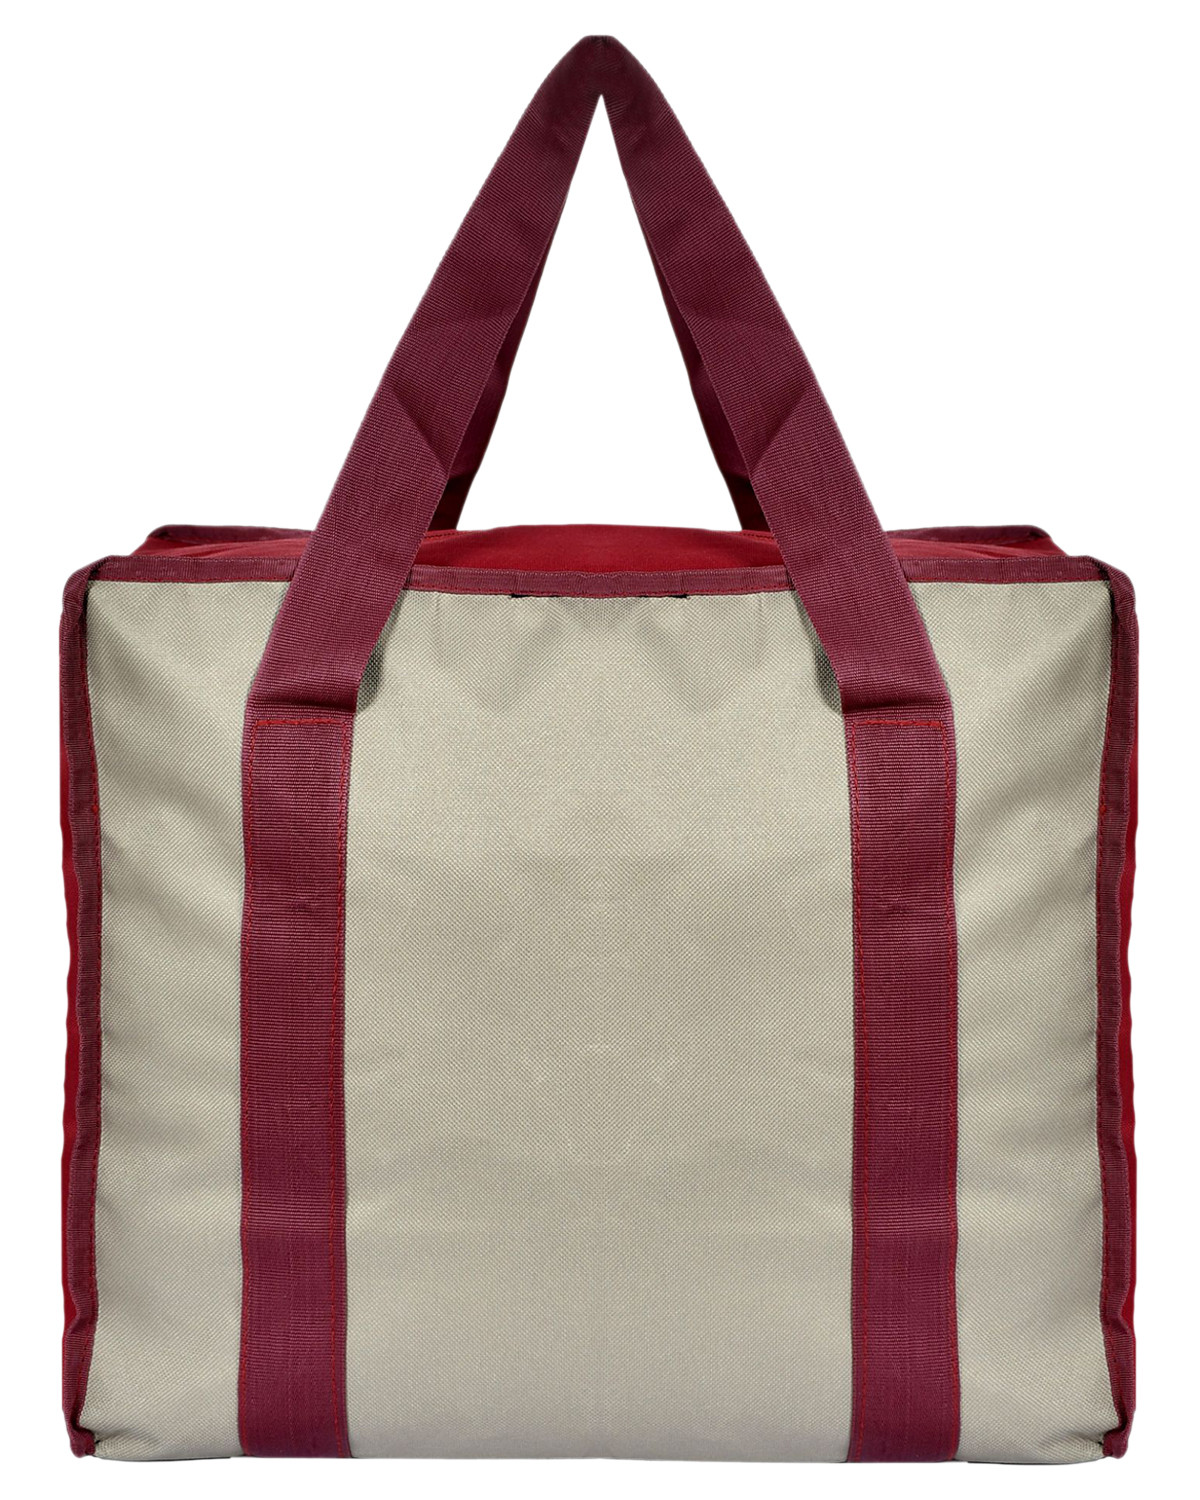 Kuber Industries Rexine Shopping Bags/Grocery Bag for Carry Grocery, Fruits, Vegetable with Handles (Beige) 54KM4019